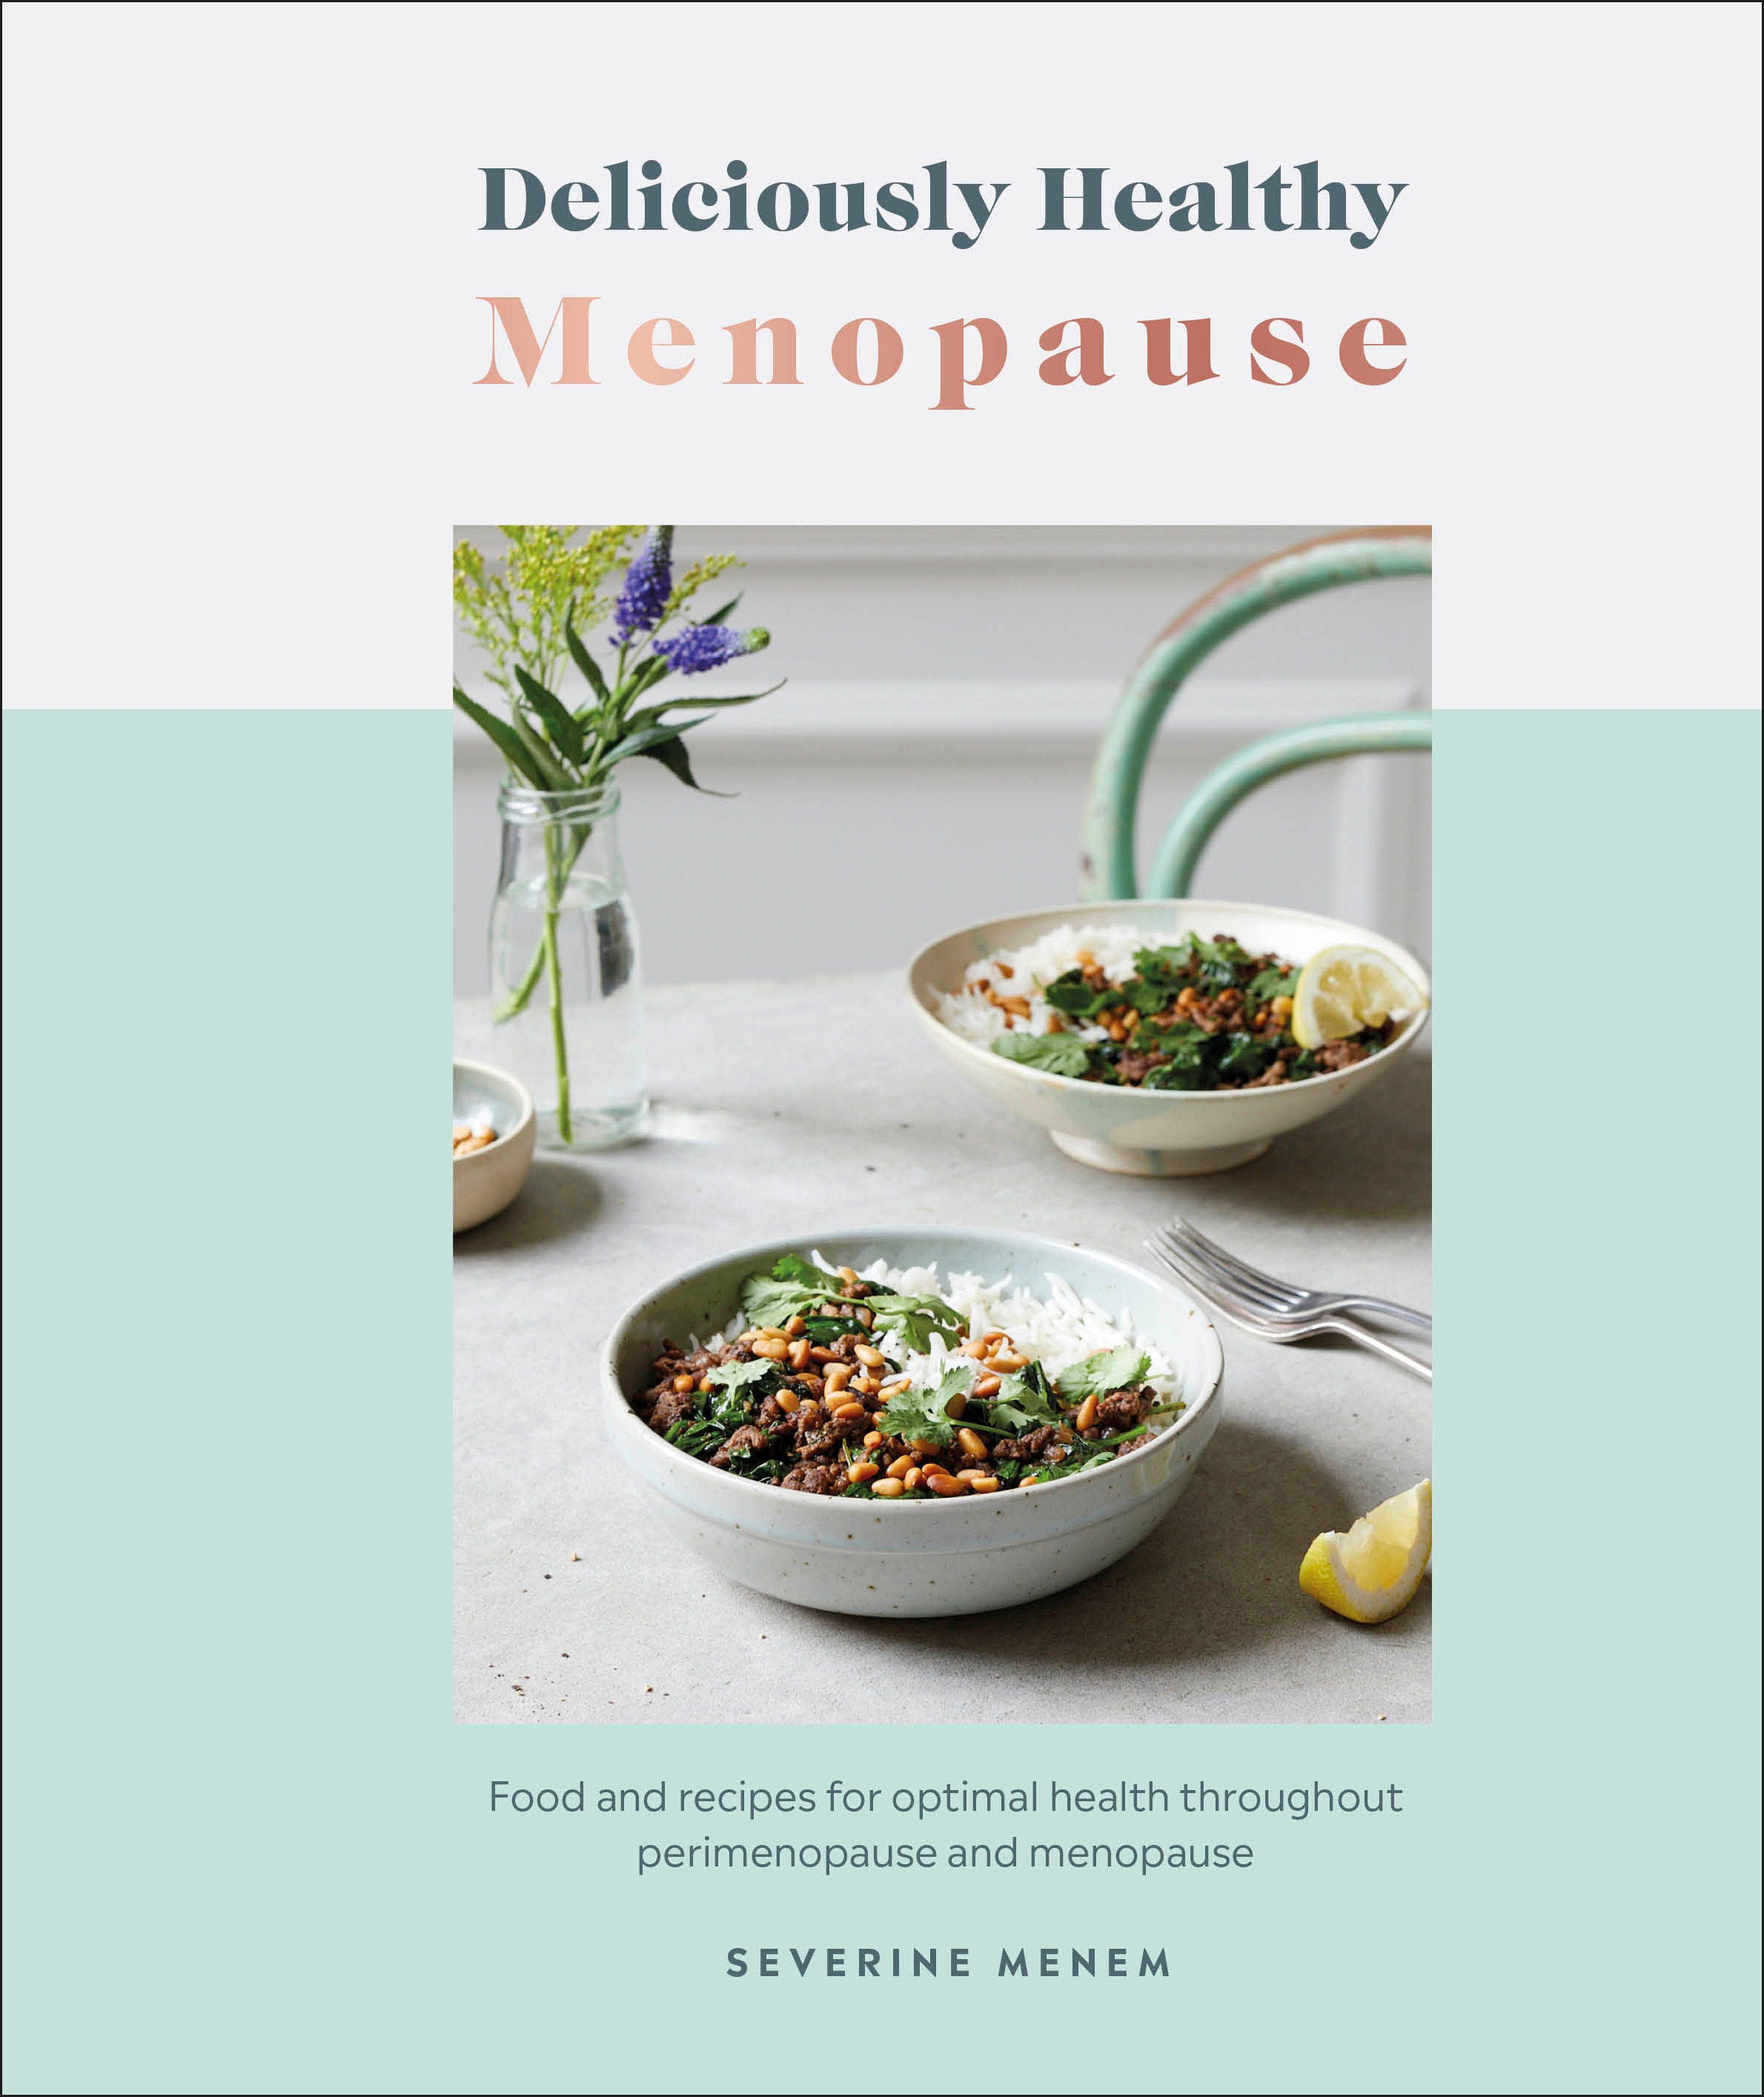 Deliciously Healthy Menopause : Food And Recipes For Optimal Health Throughout Perimenopause And Menopause | Menem, Severine